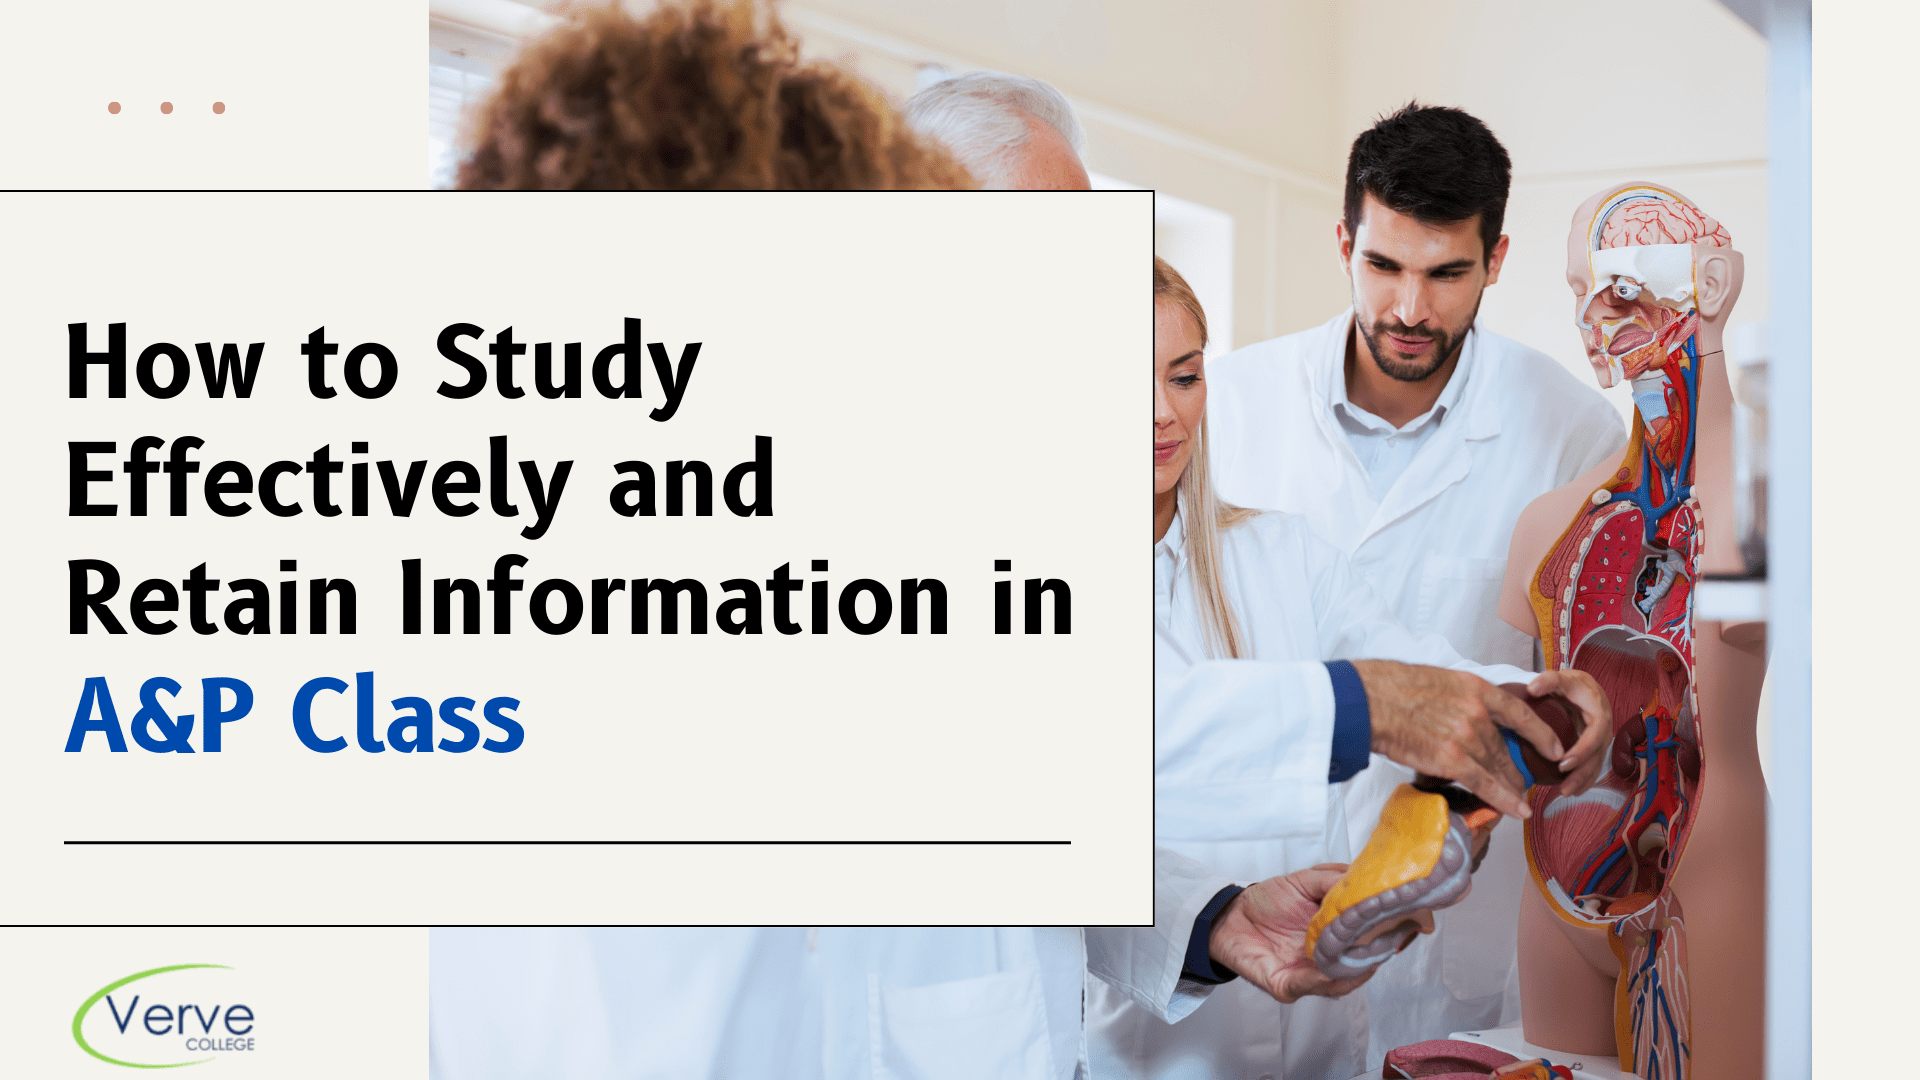 A&P Class: How to Study Effectively and Retain Information?